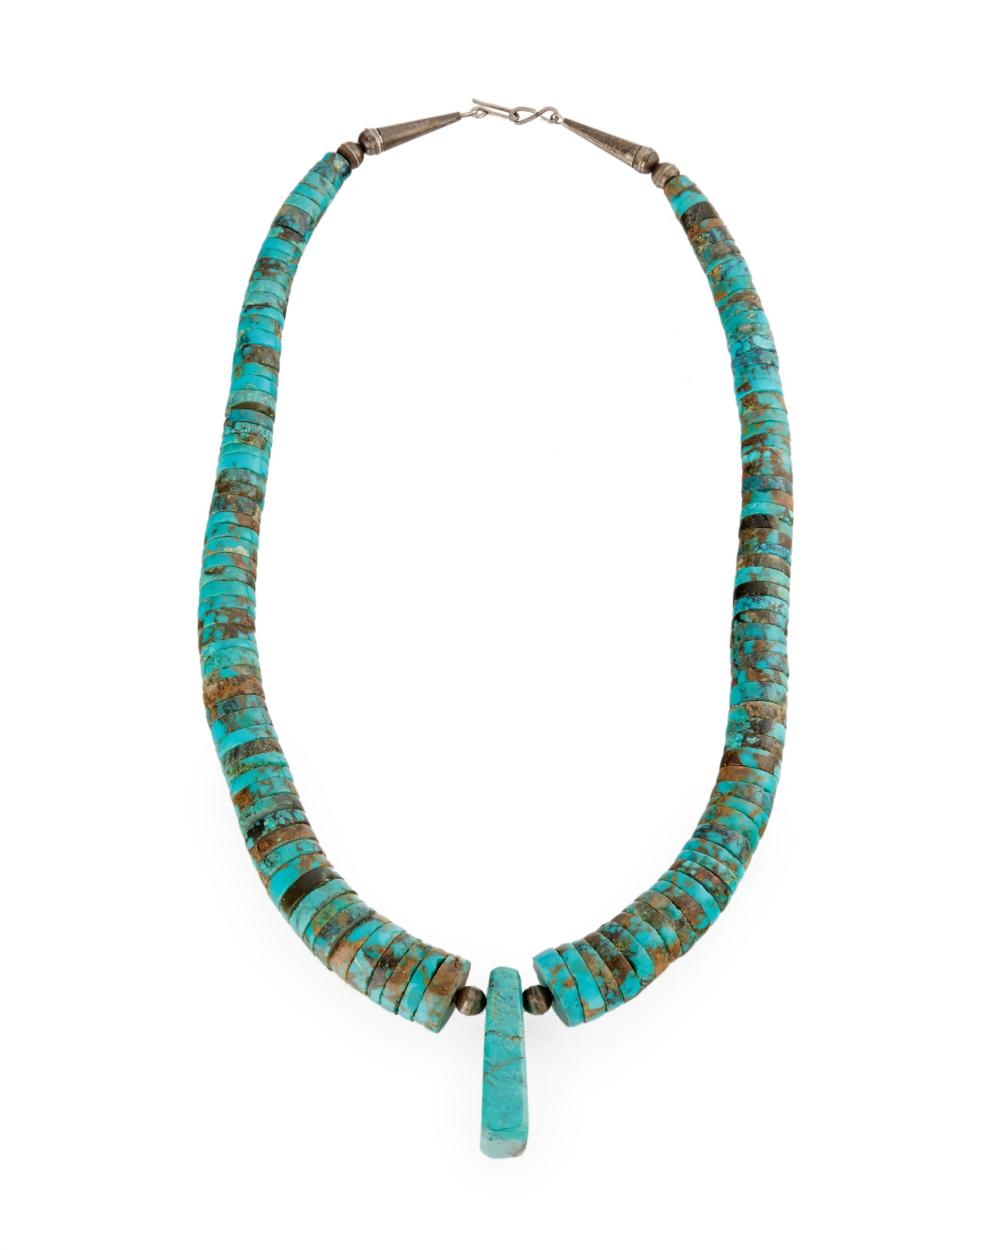 A TURQUOISE BEAD NECKLACEA turquoise 3430eb